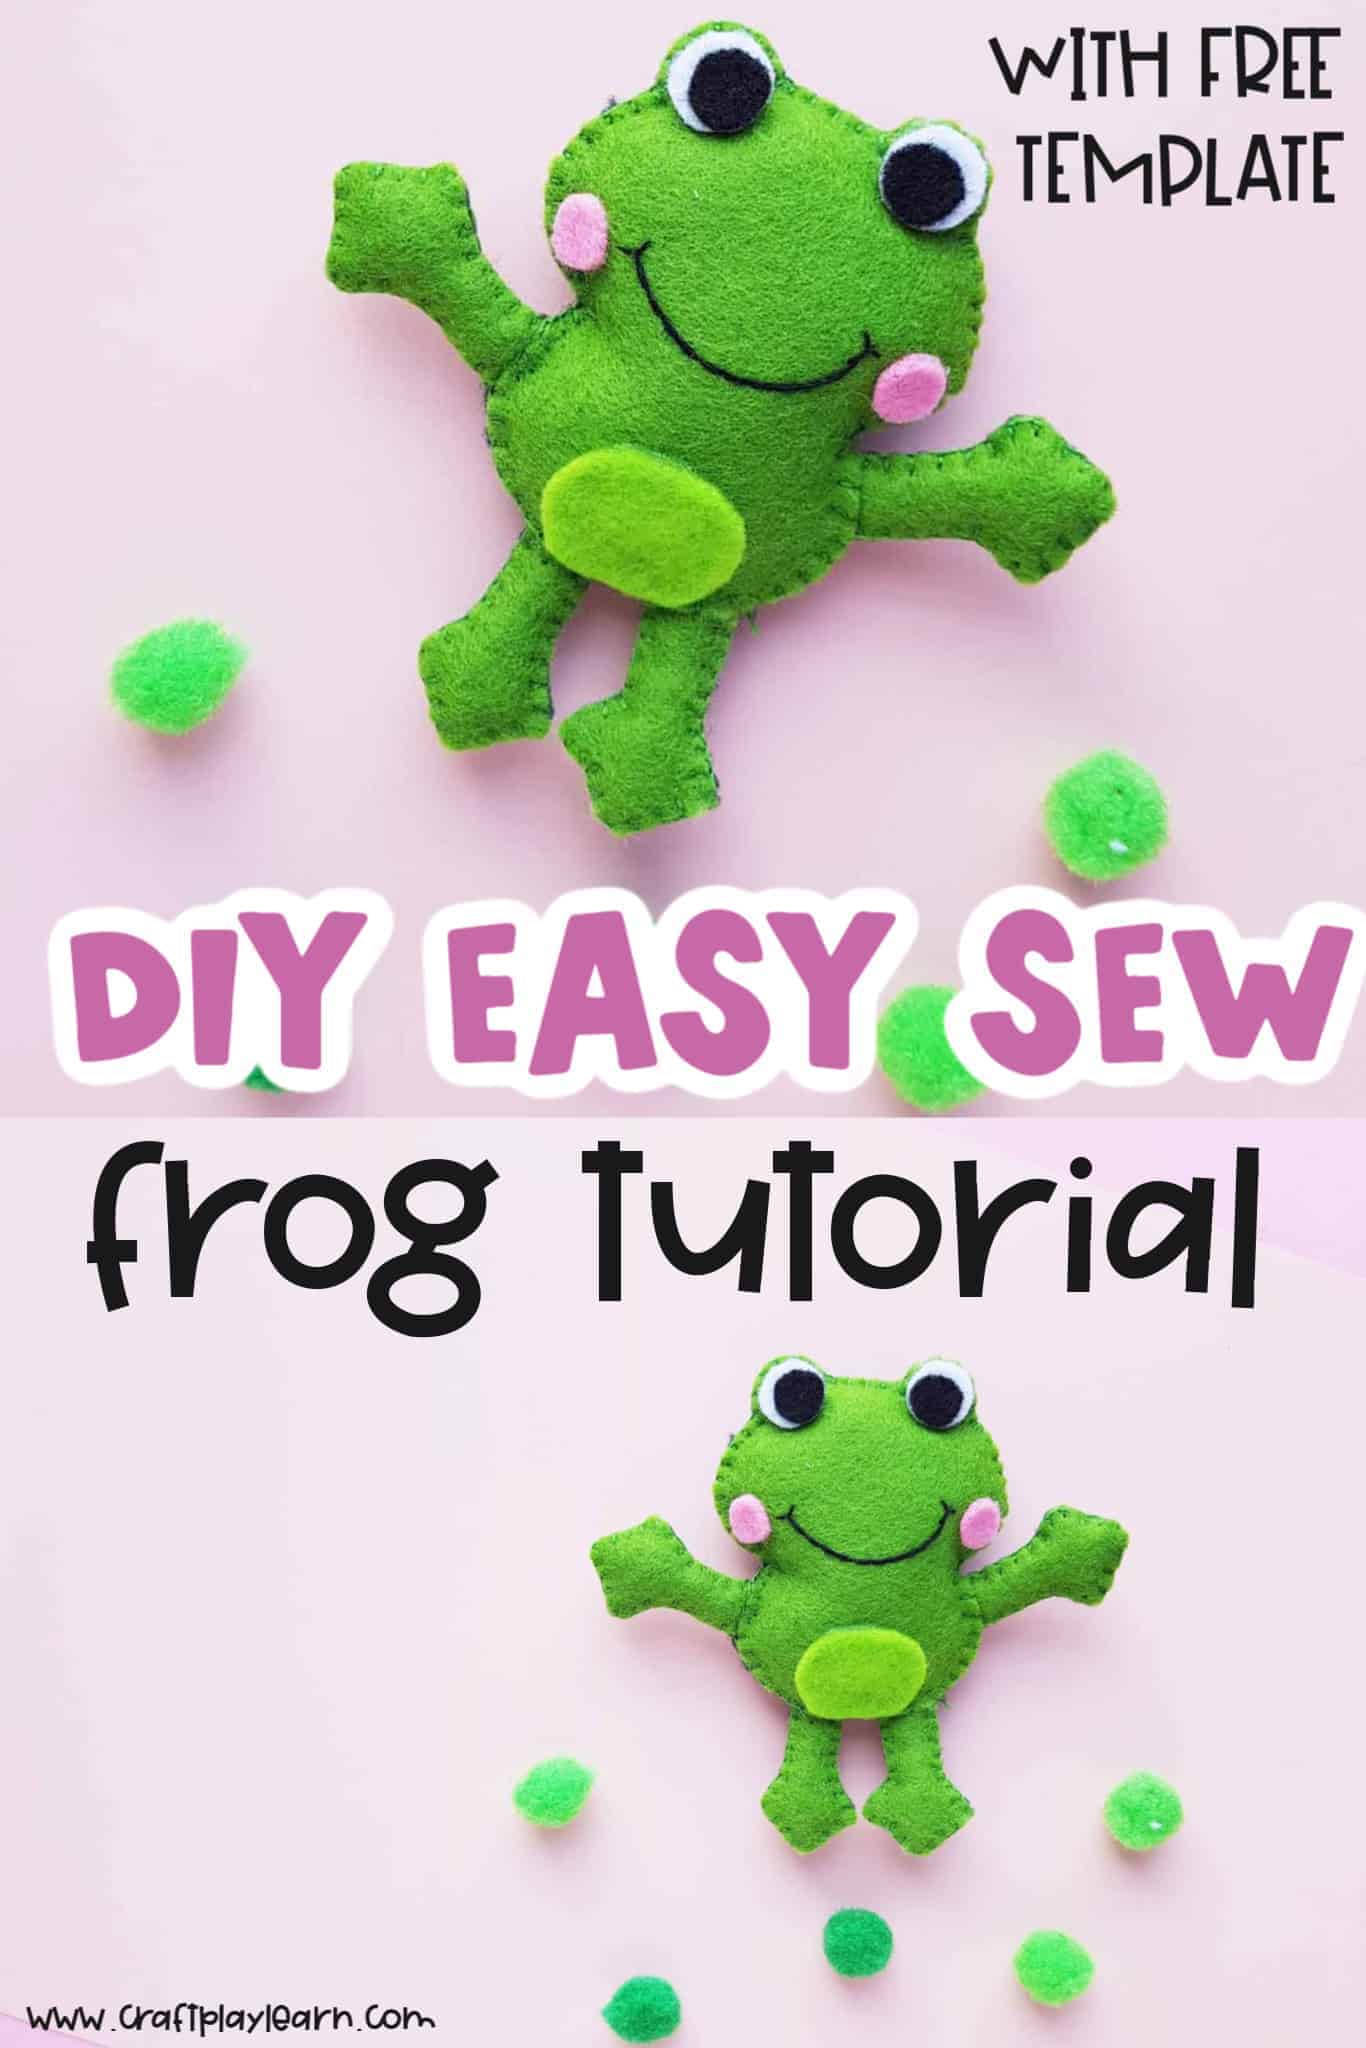 DIY Plushies: Easy Sew Frog Plushie - Craft Play Learn